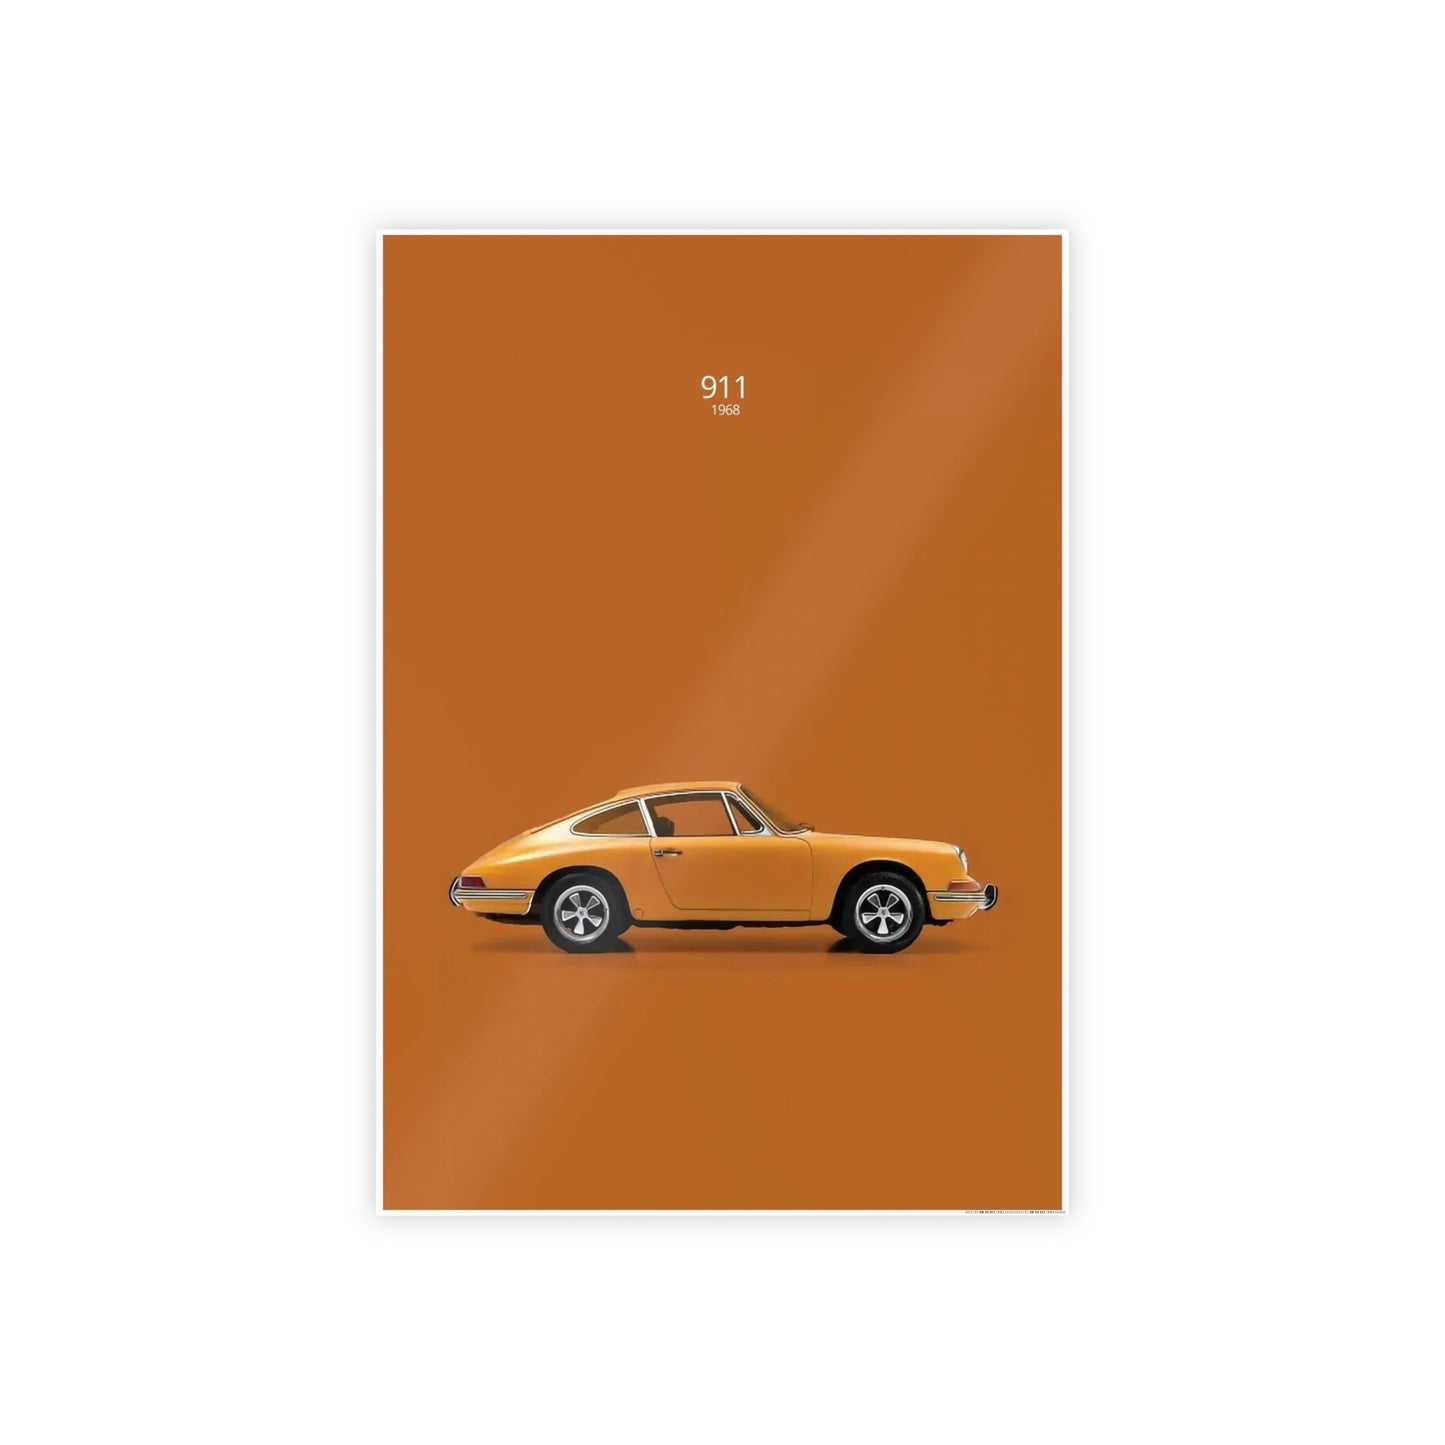 Porsche Passion: A Canvas & Poster Print of the Iconic Sports Car